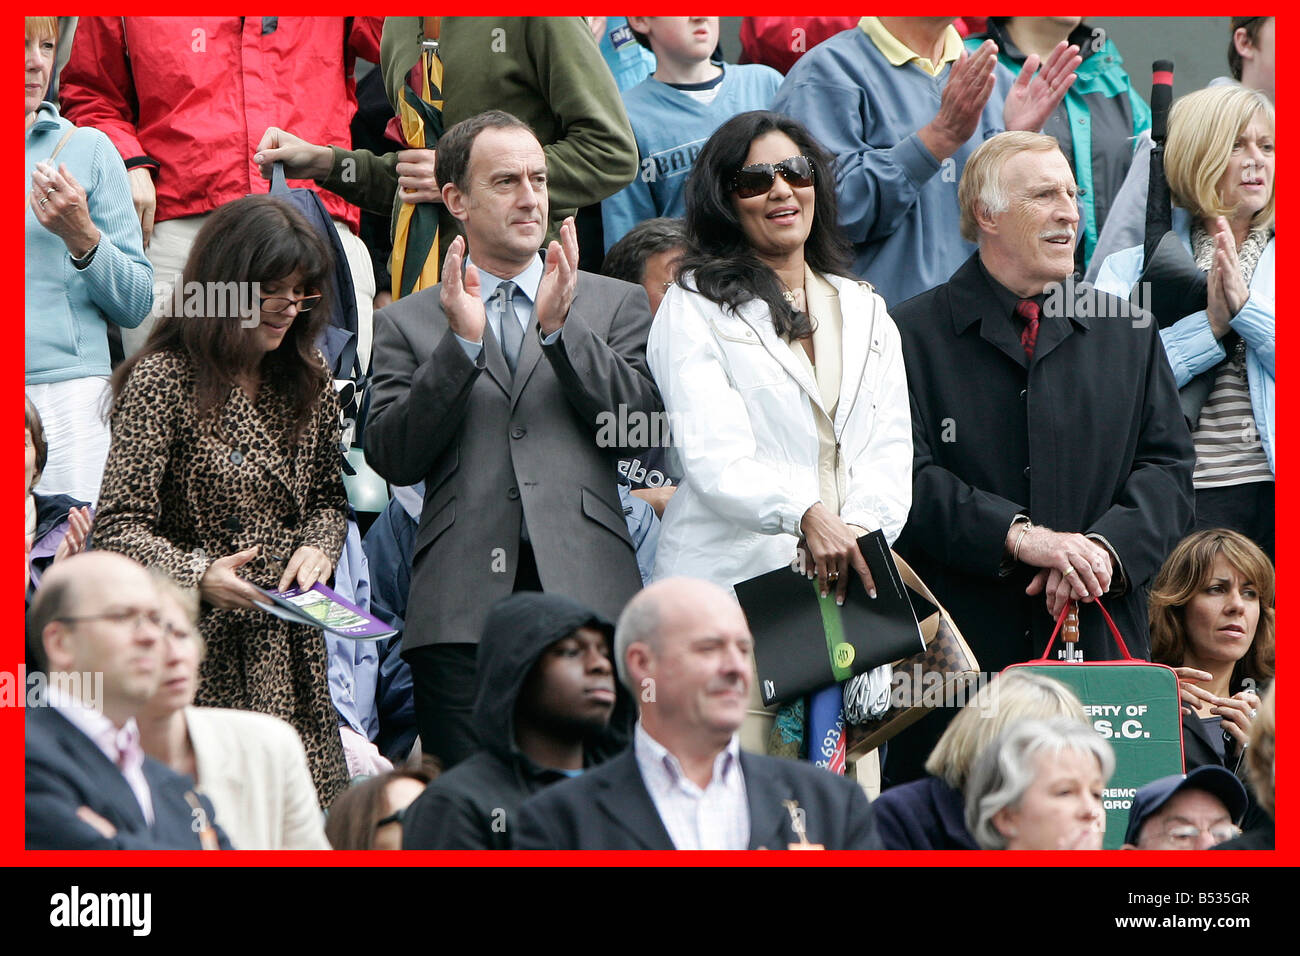 Wimbledon 25th June 2007 Day 1. The Mirror Pic. Ian Vogler. Tim Henman v Carlos Moya.;Bruce Forsyth with his wife and Angus Deayton on Centre Court Stock Photo